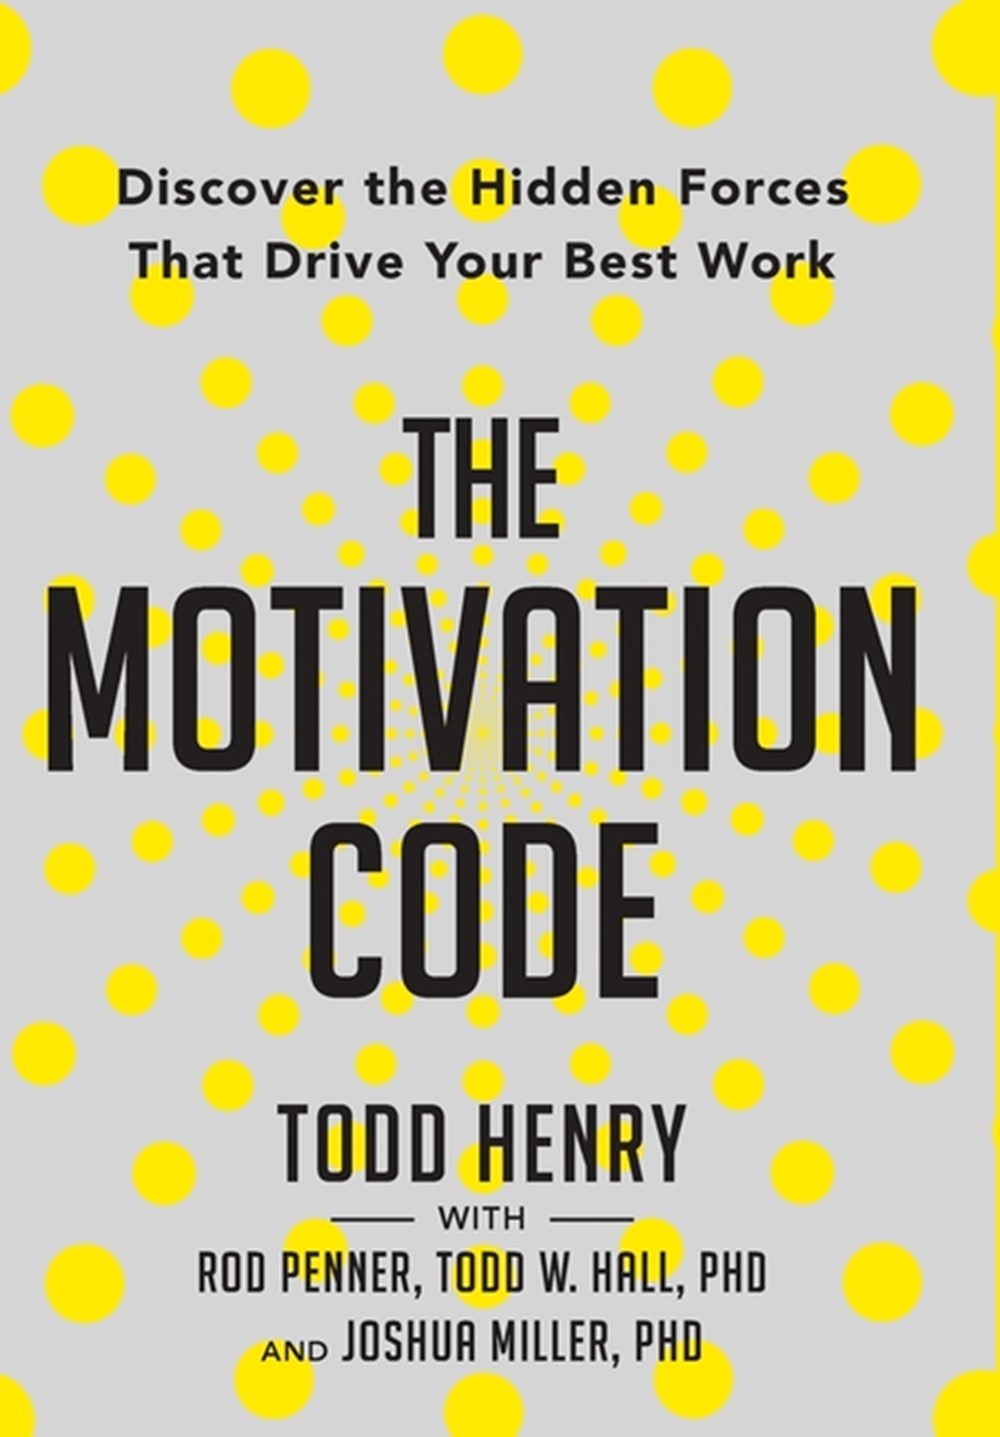 Motivation Code: Discover The Hidden Forces That Drive Your Best Work